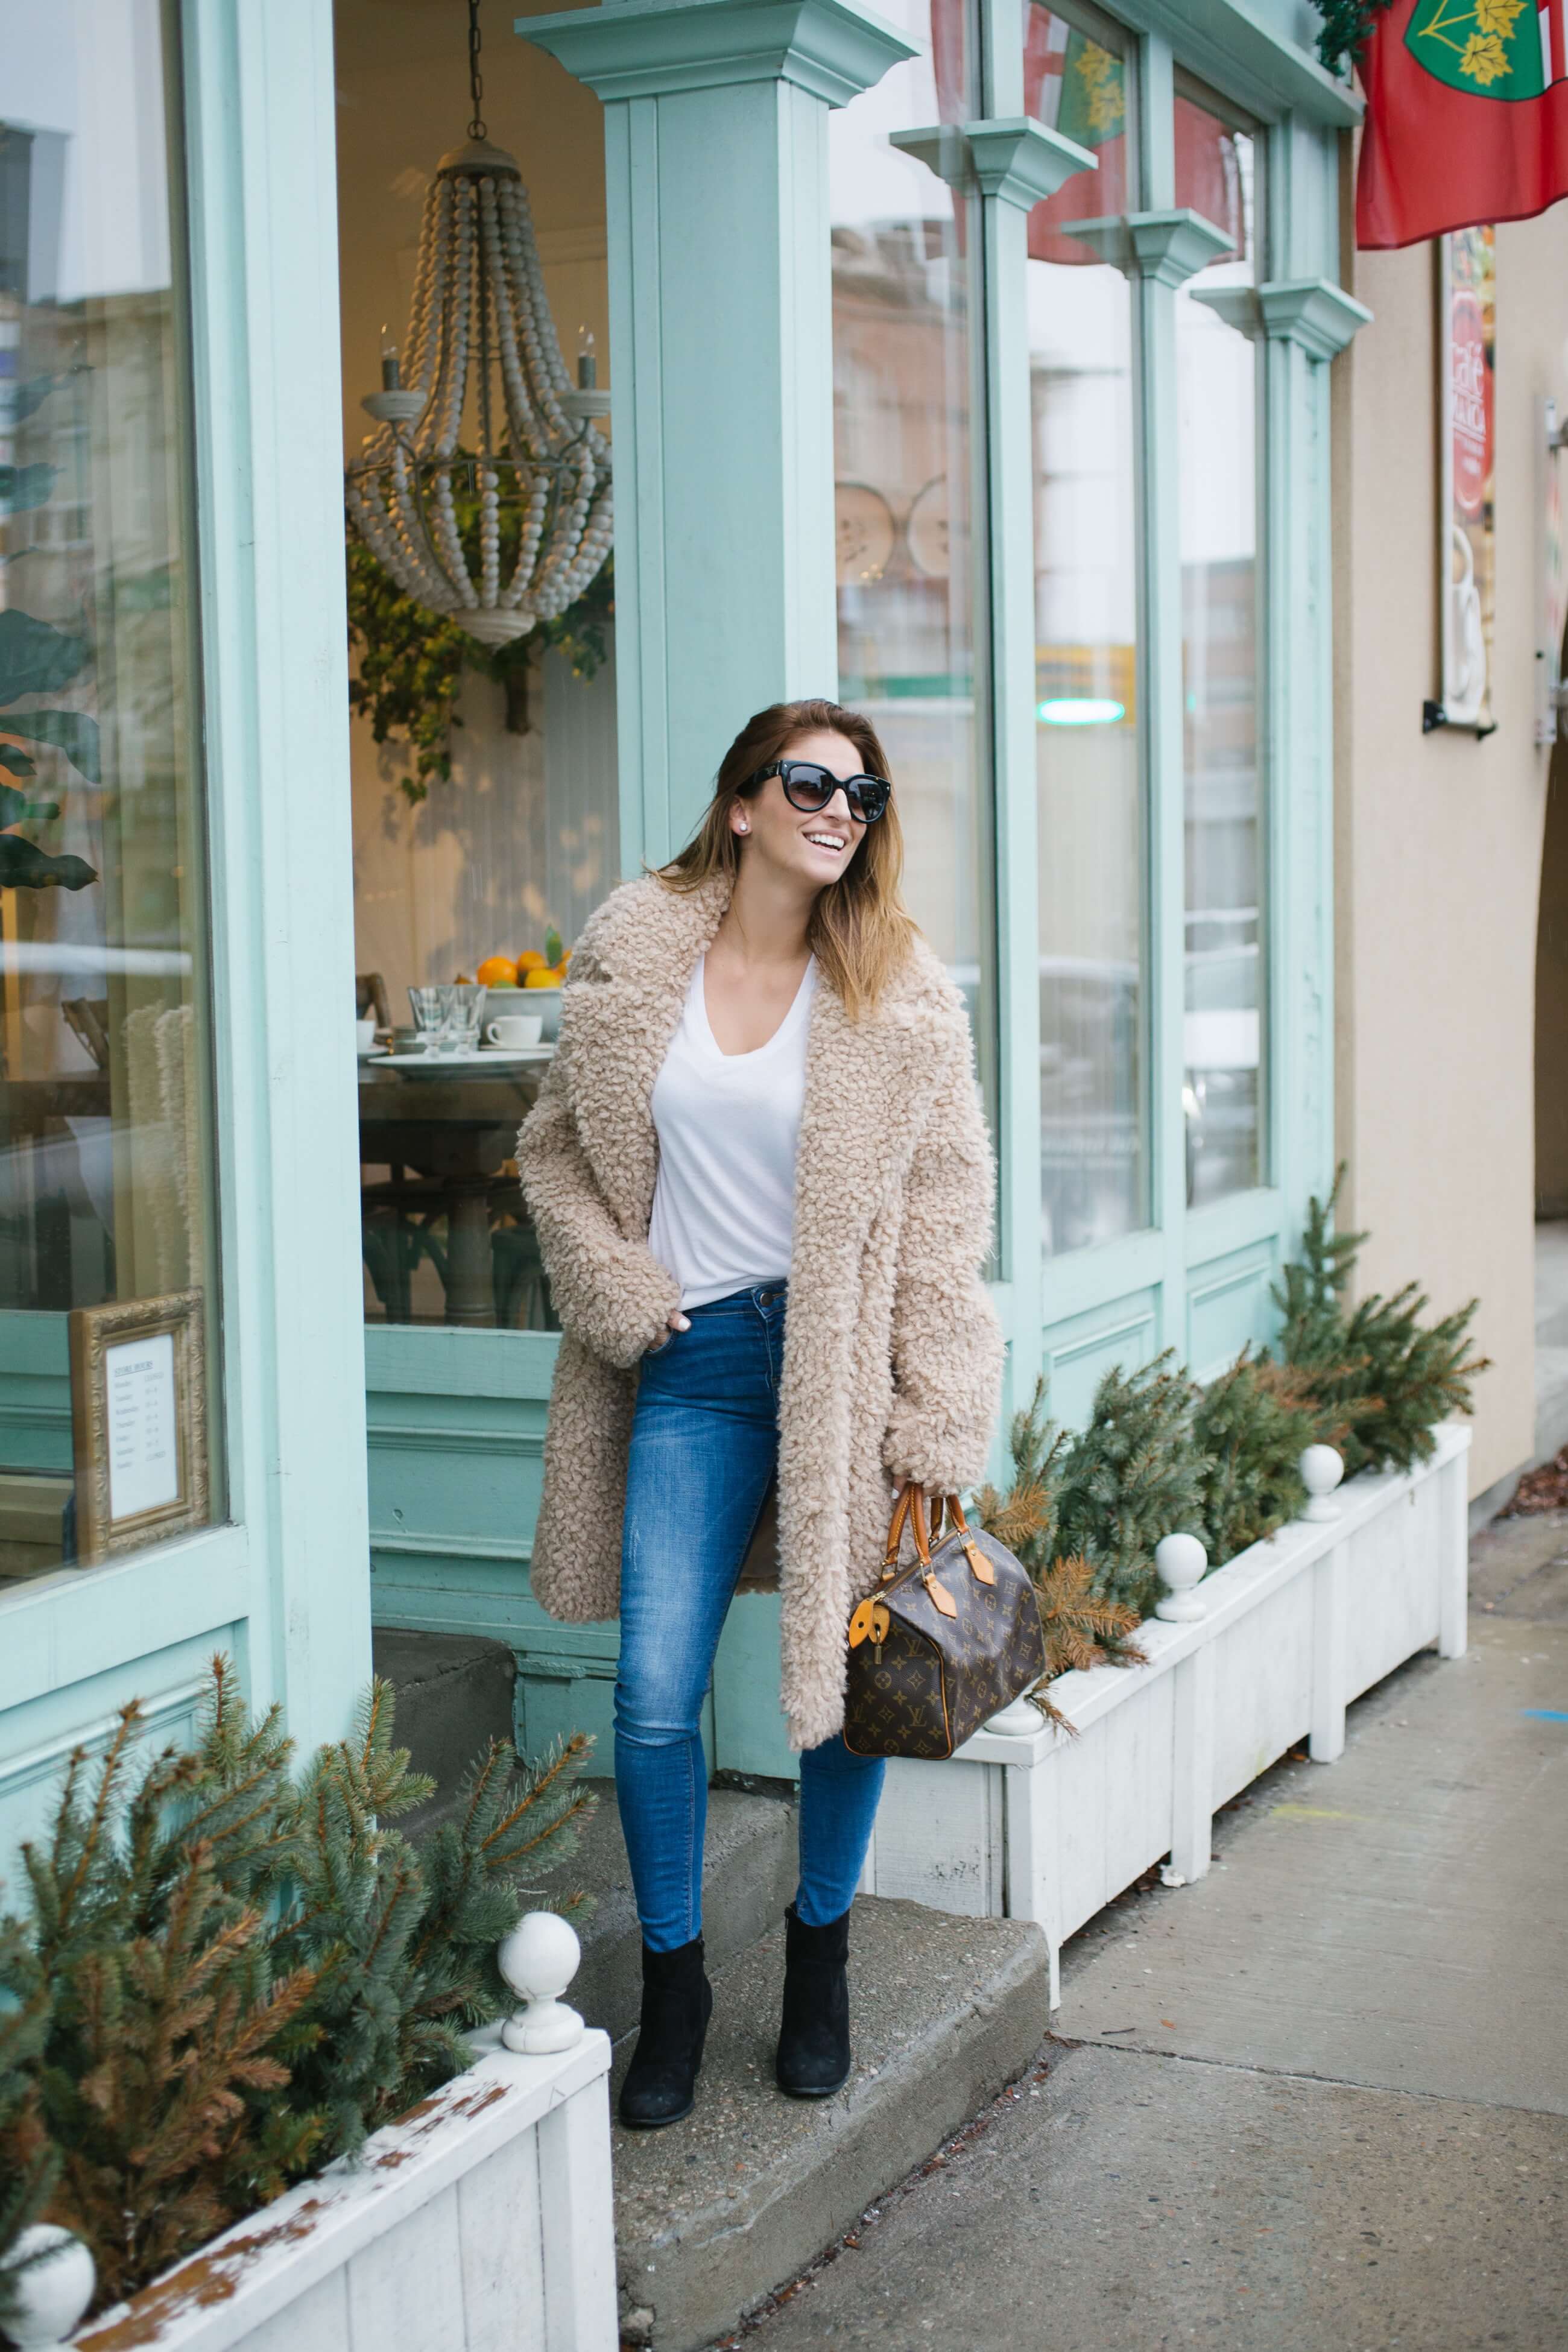 Spring style with teddy bear coat, jeans, t-shirt, and booties.  Louis Vuitton speedy - easy spring style sparkleshinylove Mandy Furnis